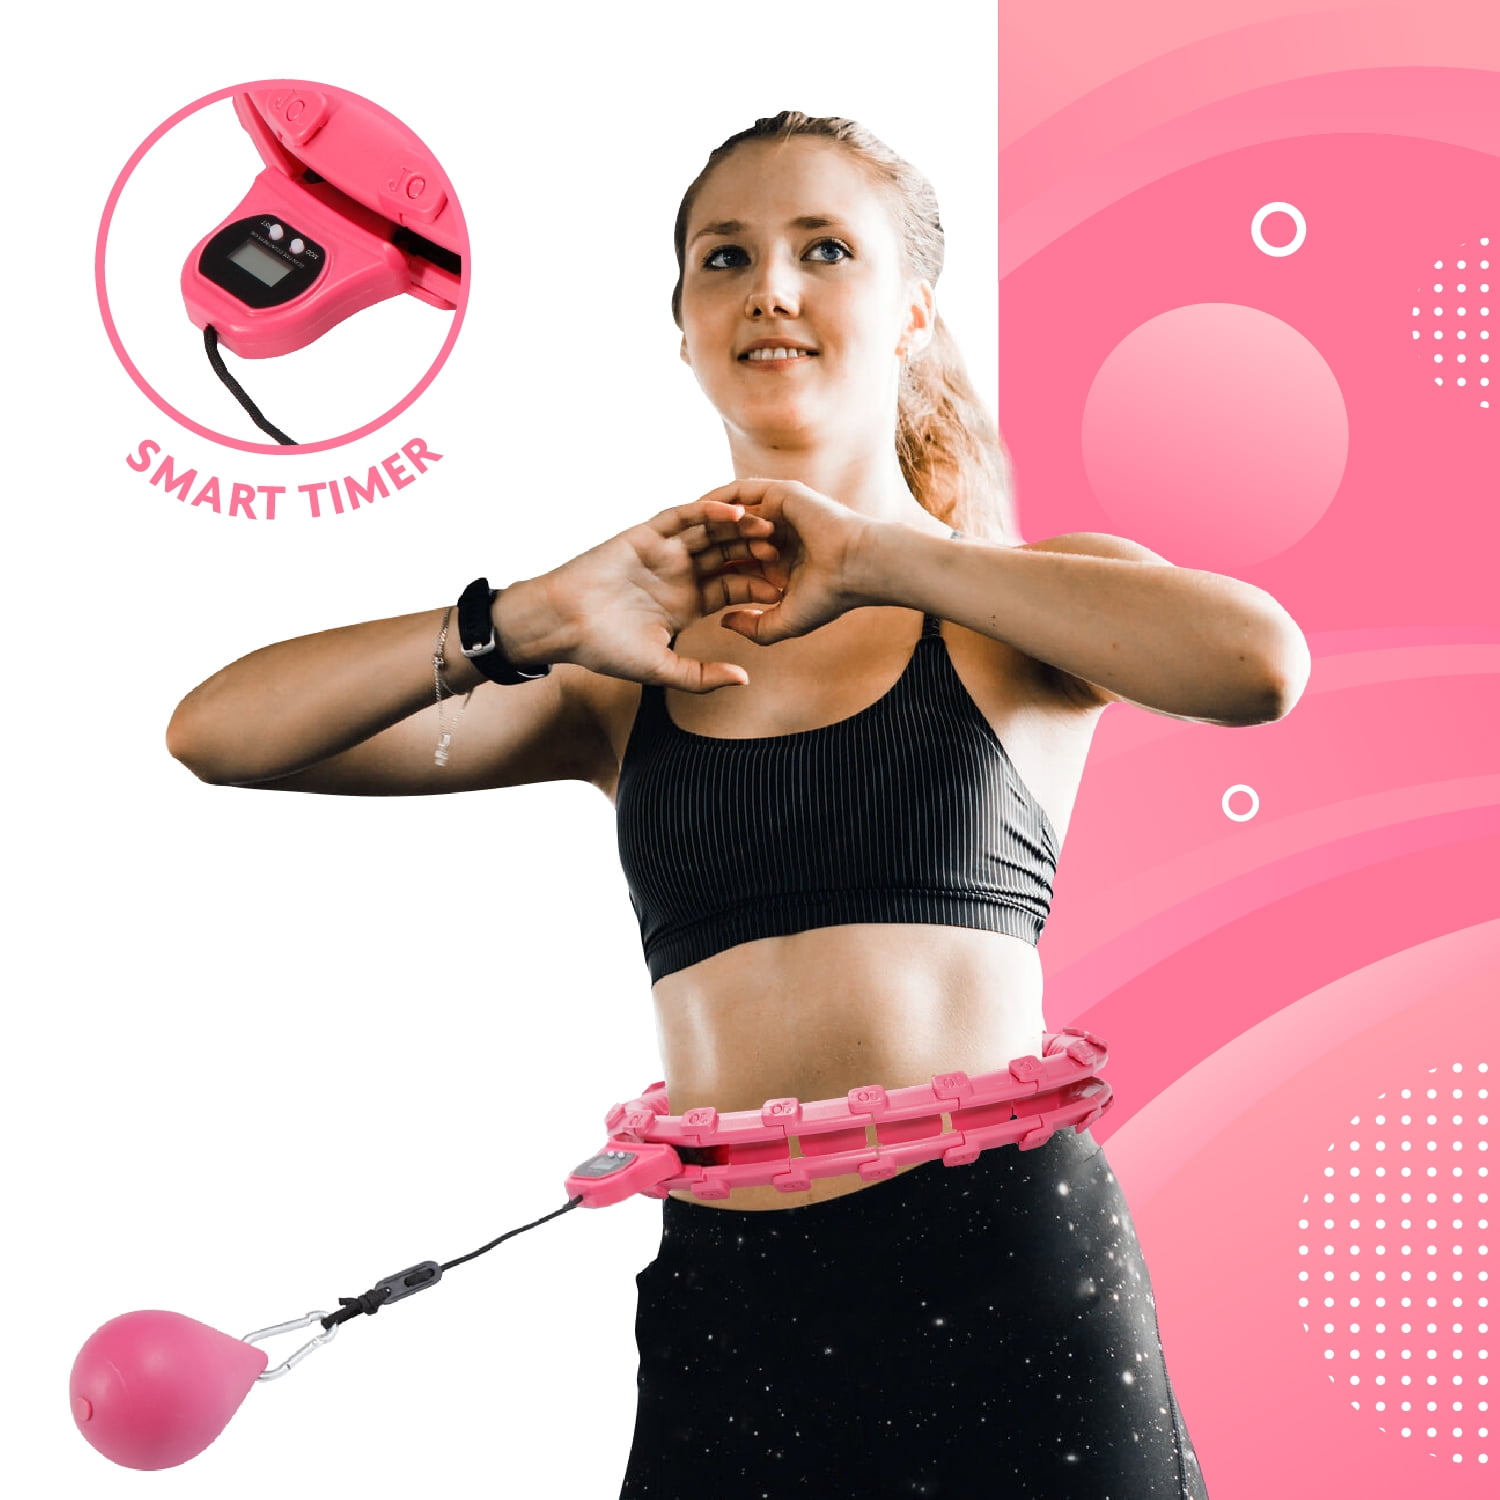 66FIT WEIGHTED HULA HOOPS - WAVE DESIGN TO BOOST CORE MUSCLE STRENGTH